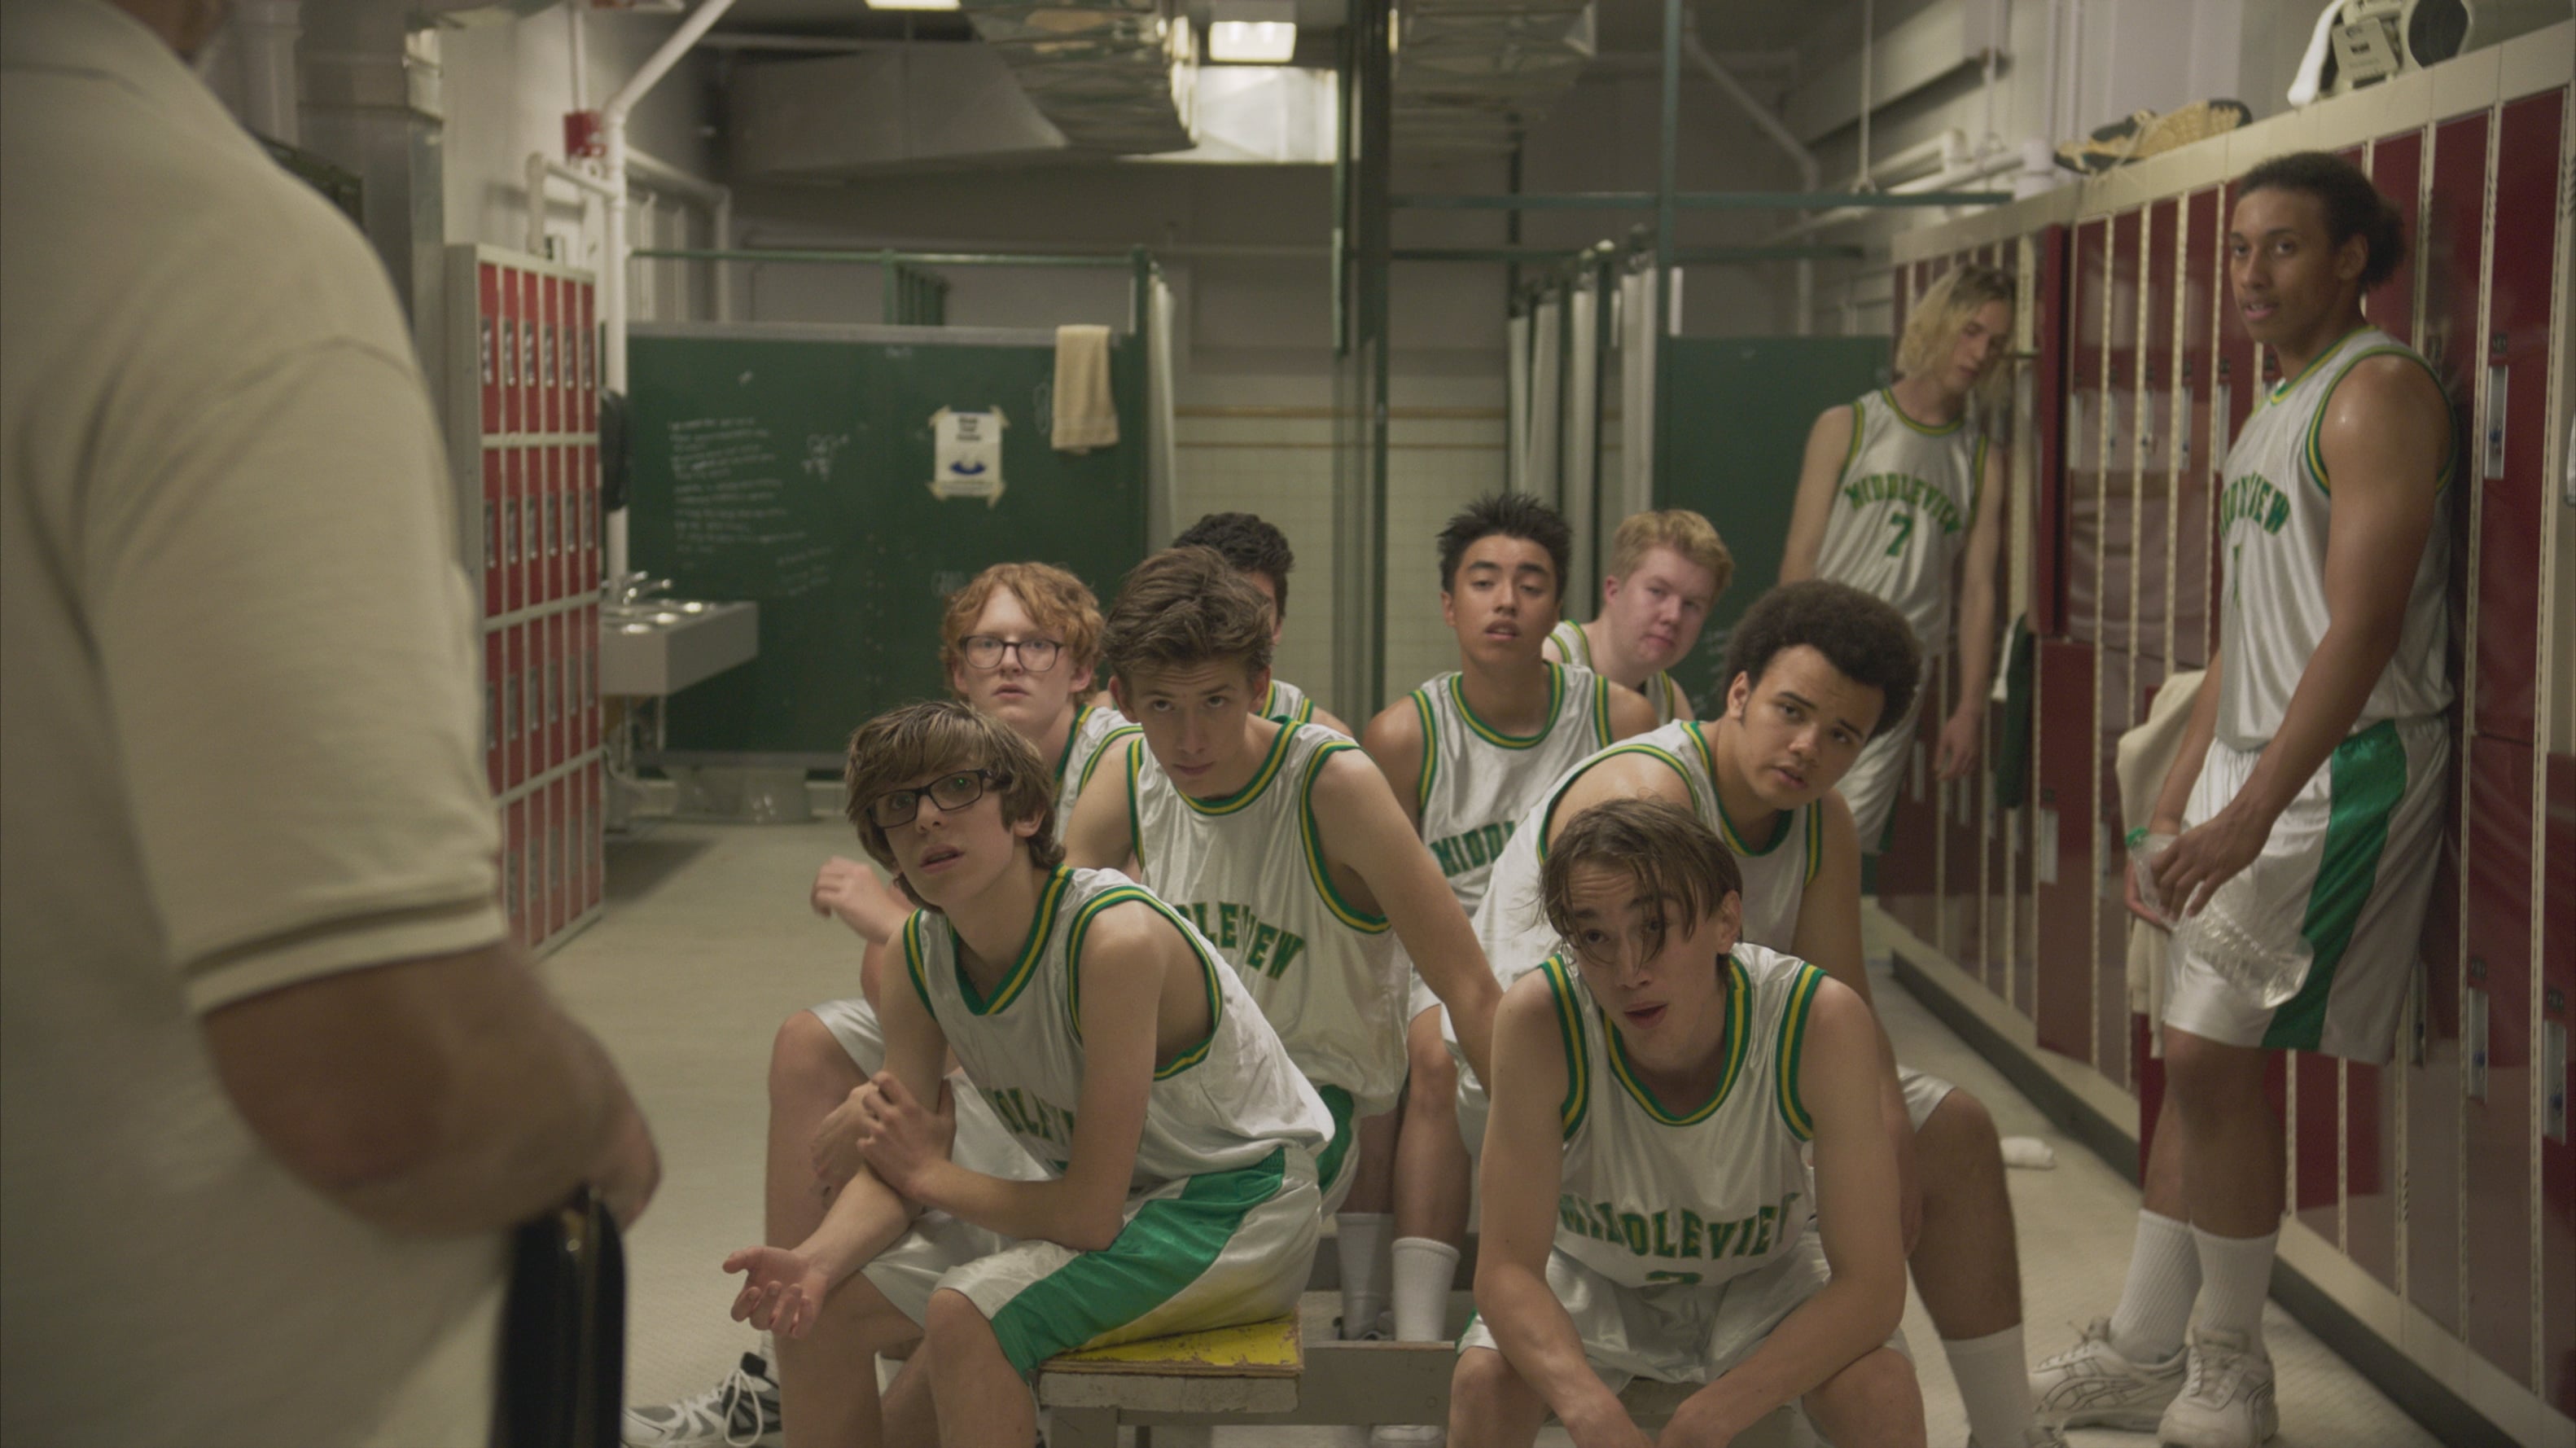 Events Transpiring Before, During, and After a High School Basketball Game 2020 123movies